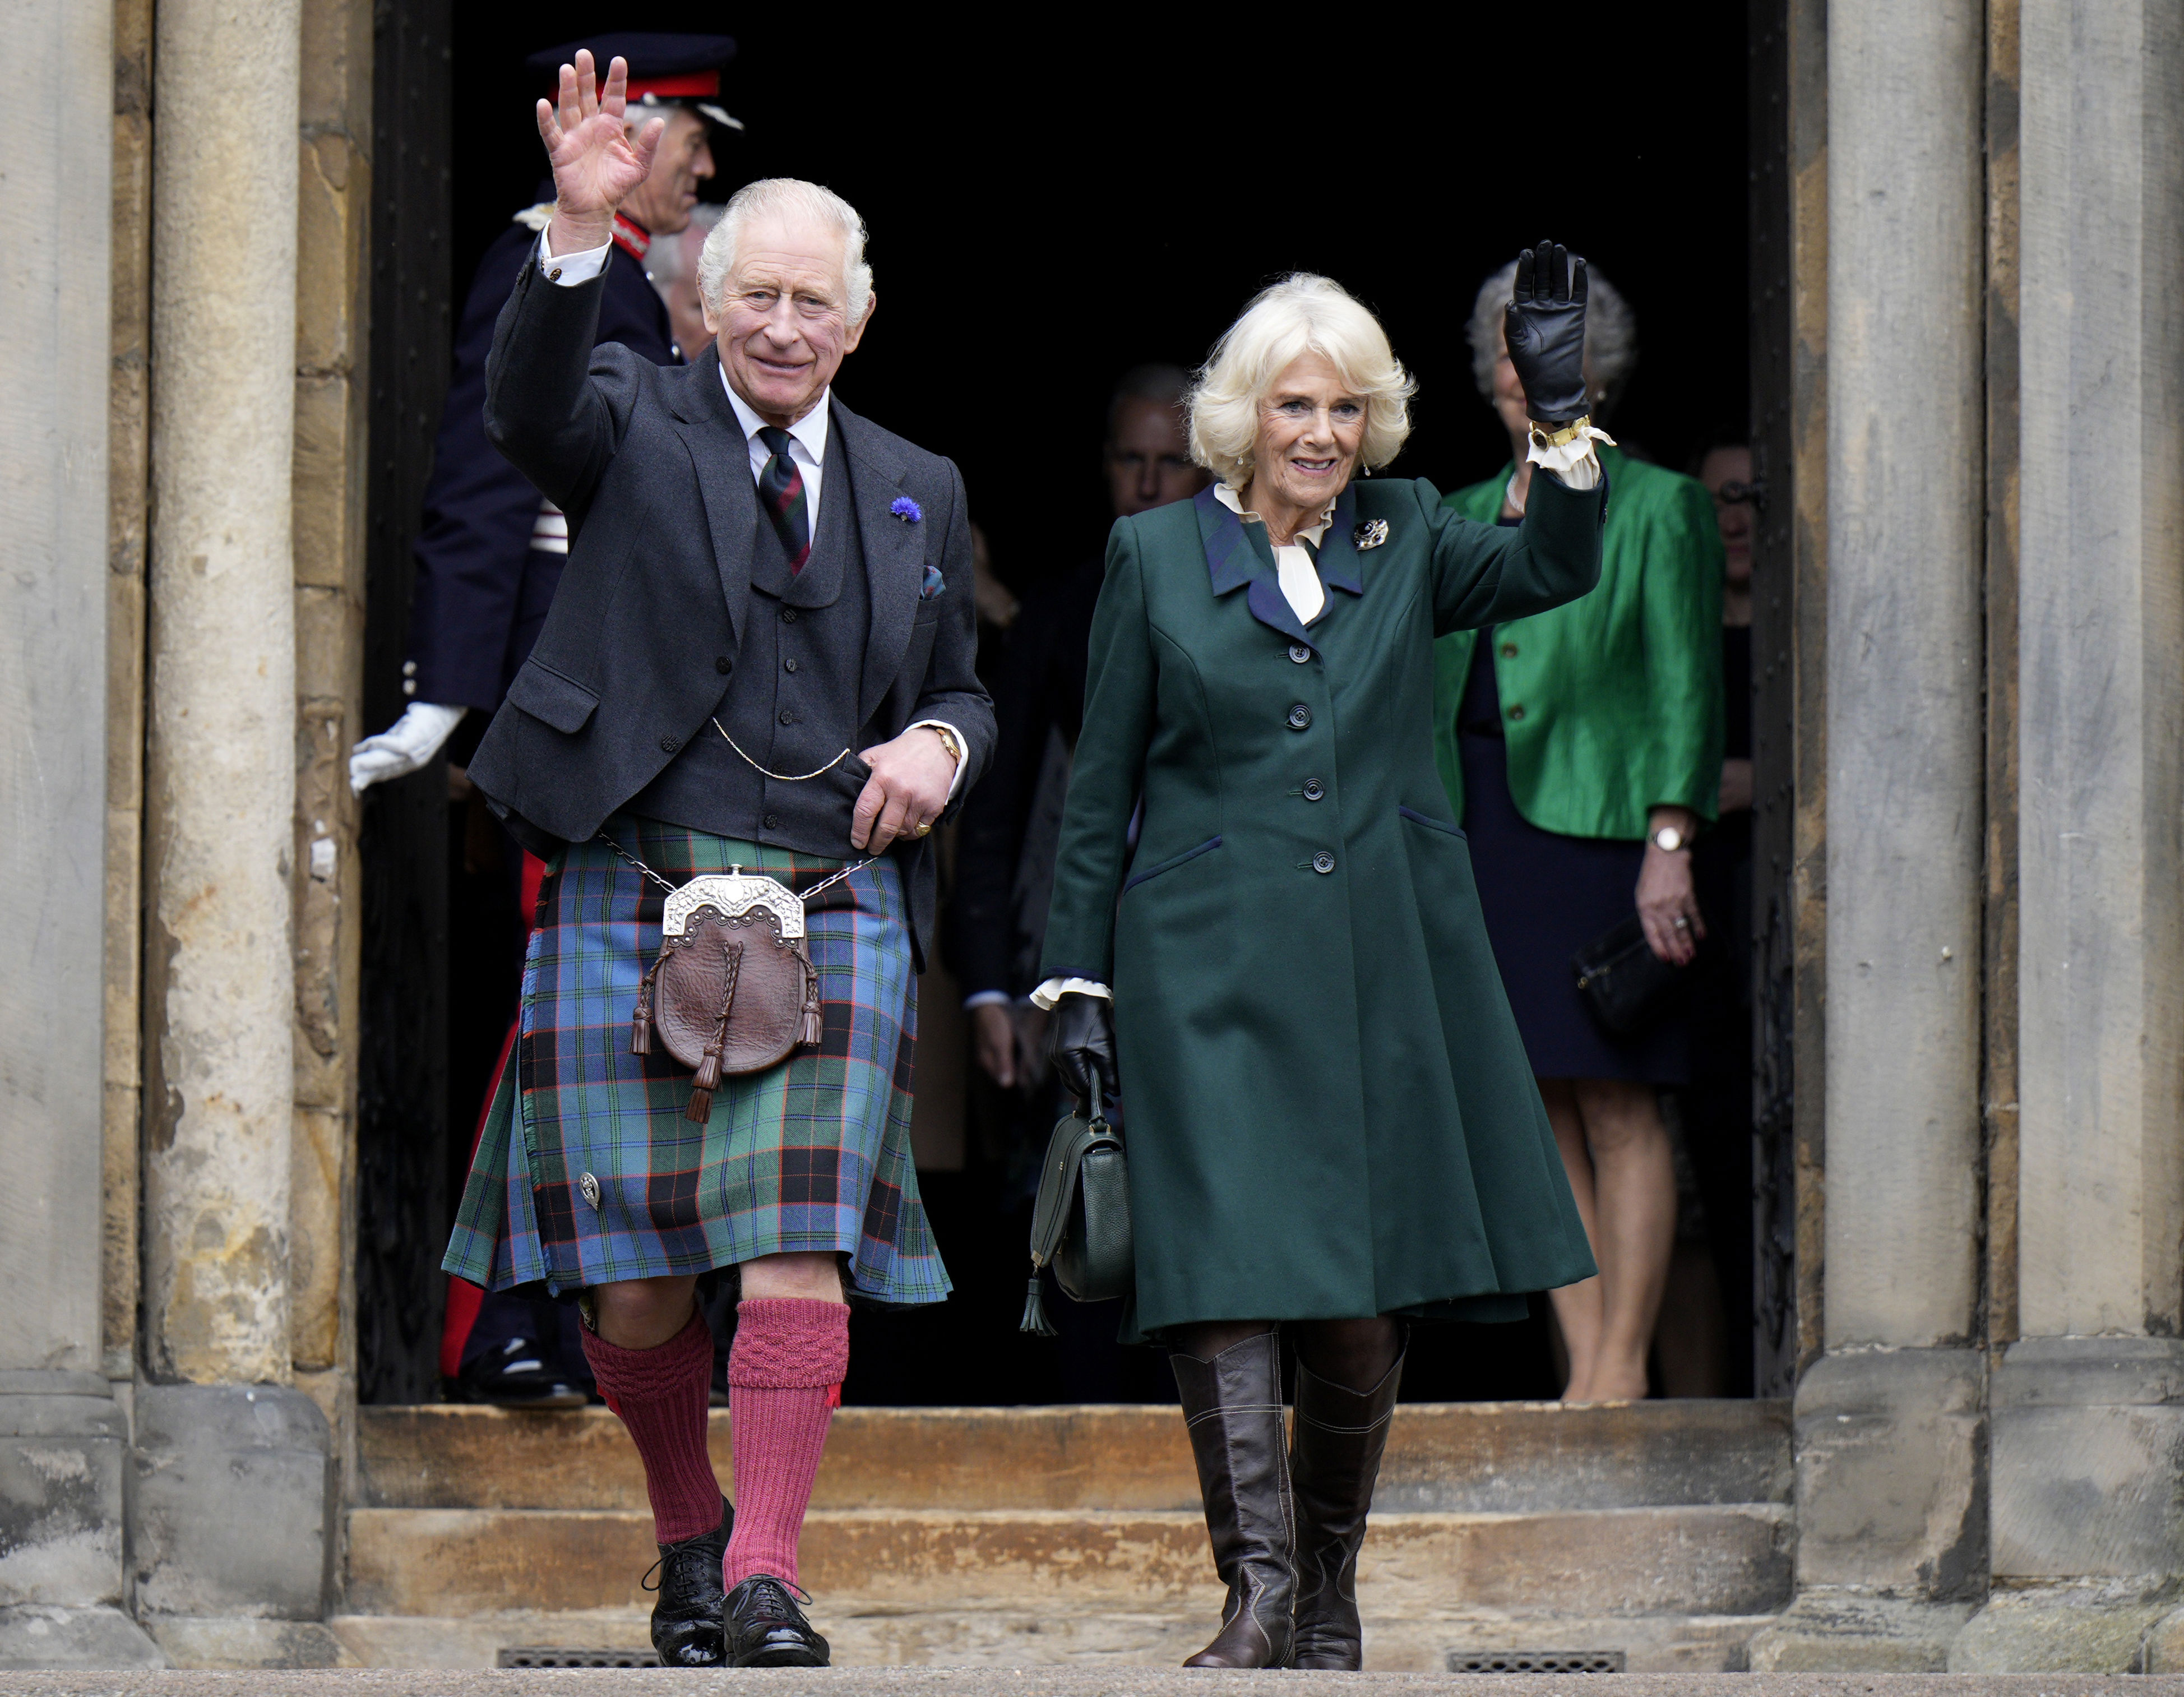 <p>A kilted King Charles III and his wife, Queen Consort Camilla, departed Scotland's Dunfermline Abbey on Oct. 3, 2022, where they celebrated its 950th anniversary following a visit with local officials and Scotland's First Minister Nicola Sturgeon to mark Dunfermline being granted city status during the late queen's Platinum Jubilee.</p>